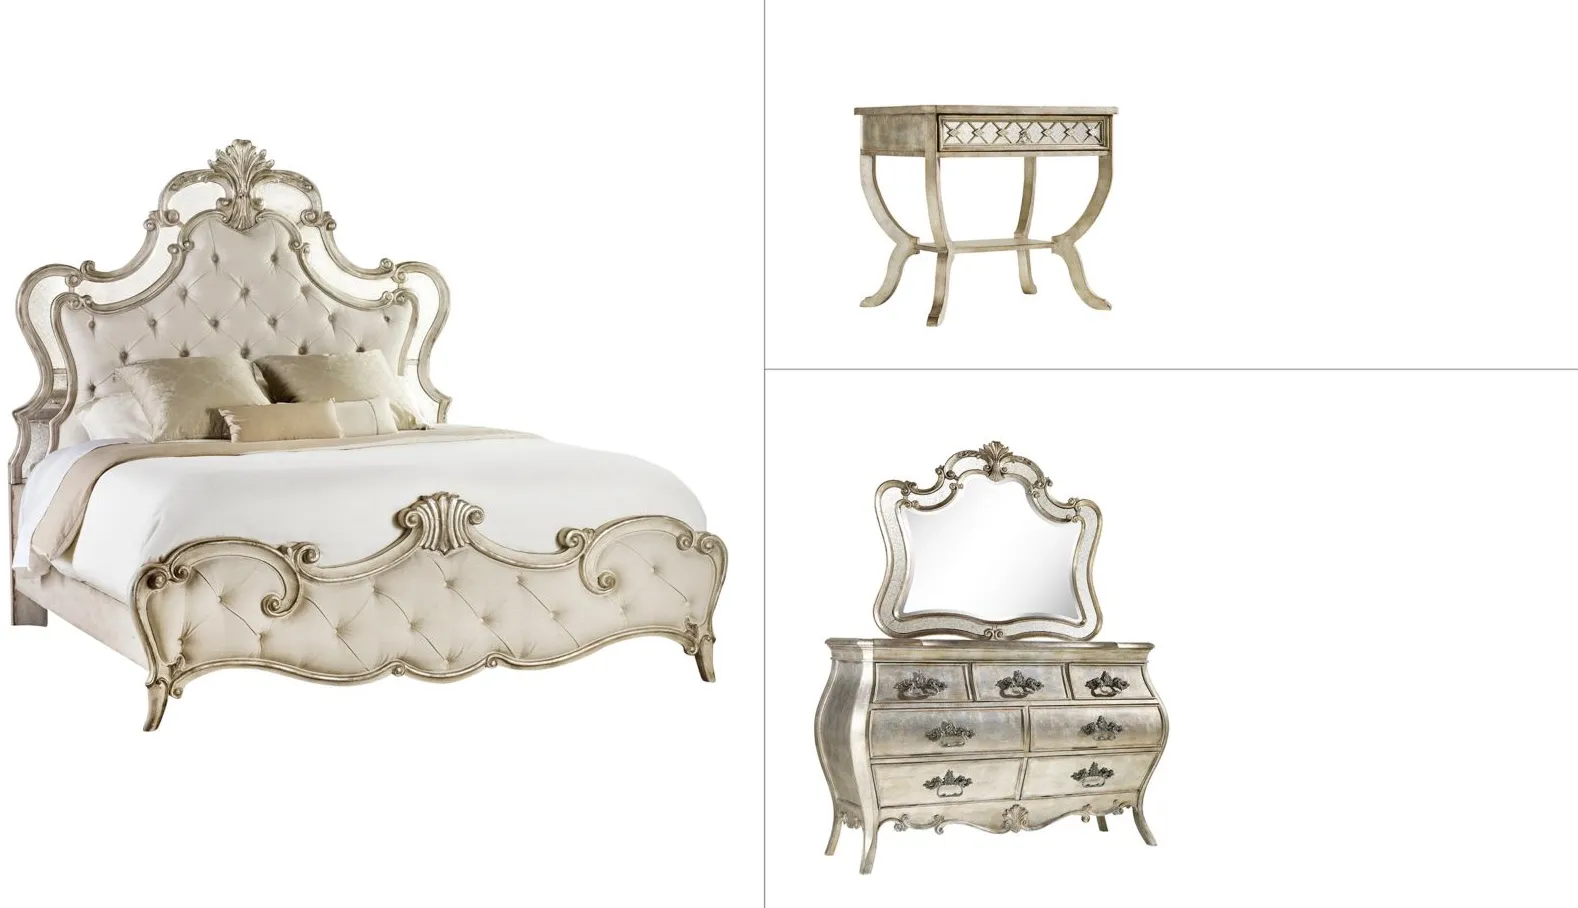 Sanctuary 4-pc. Bedroom Set w/ Bedside Table in Vintage Chalky White / Samantha Cream by Hooker Furniture